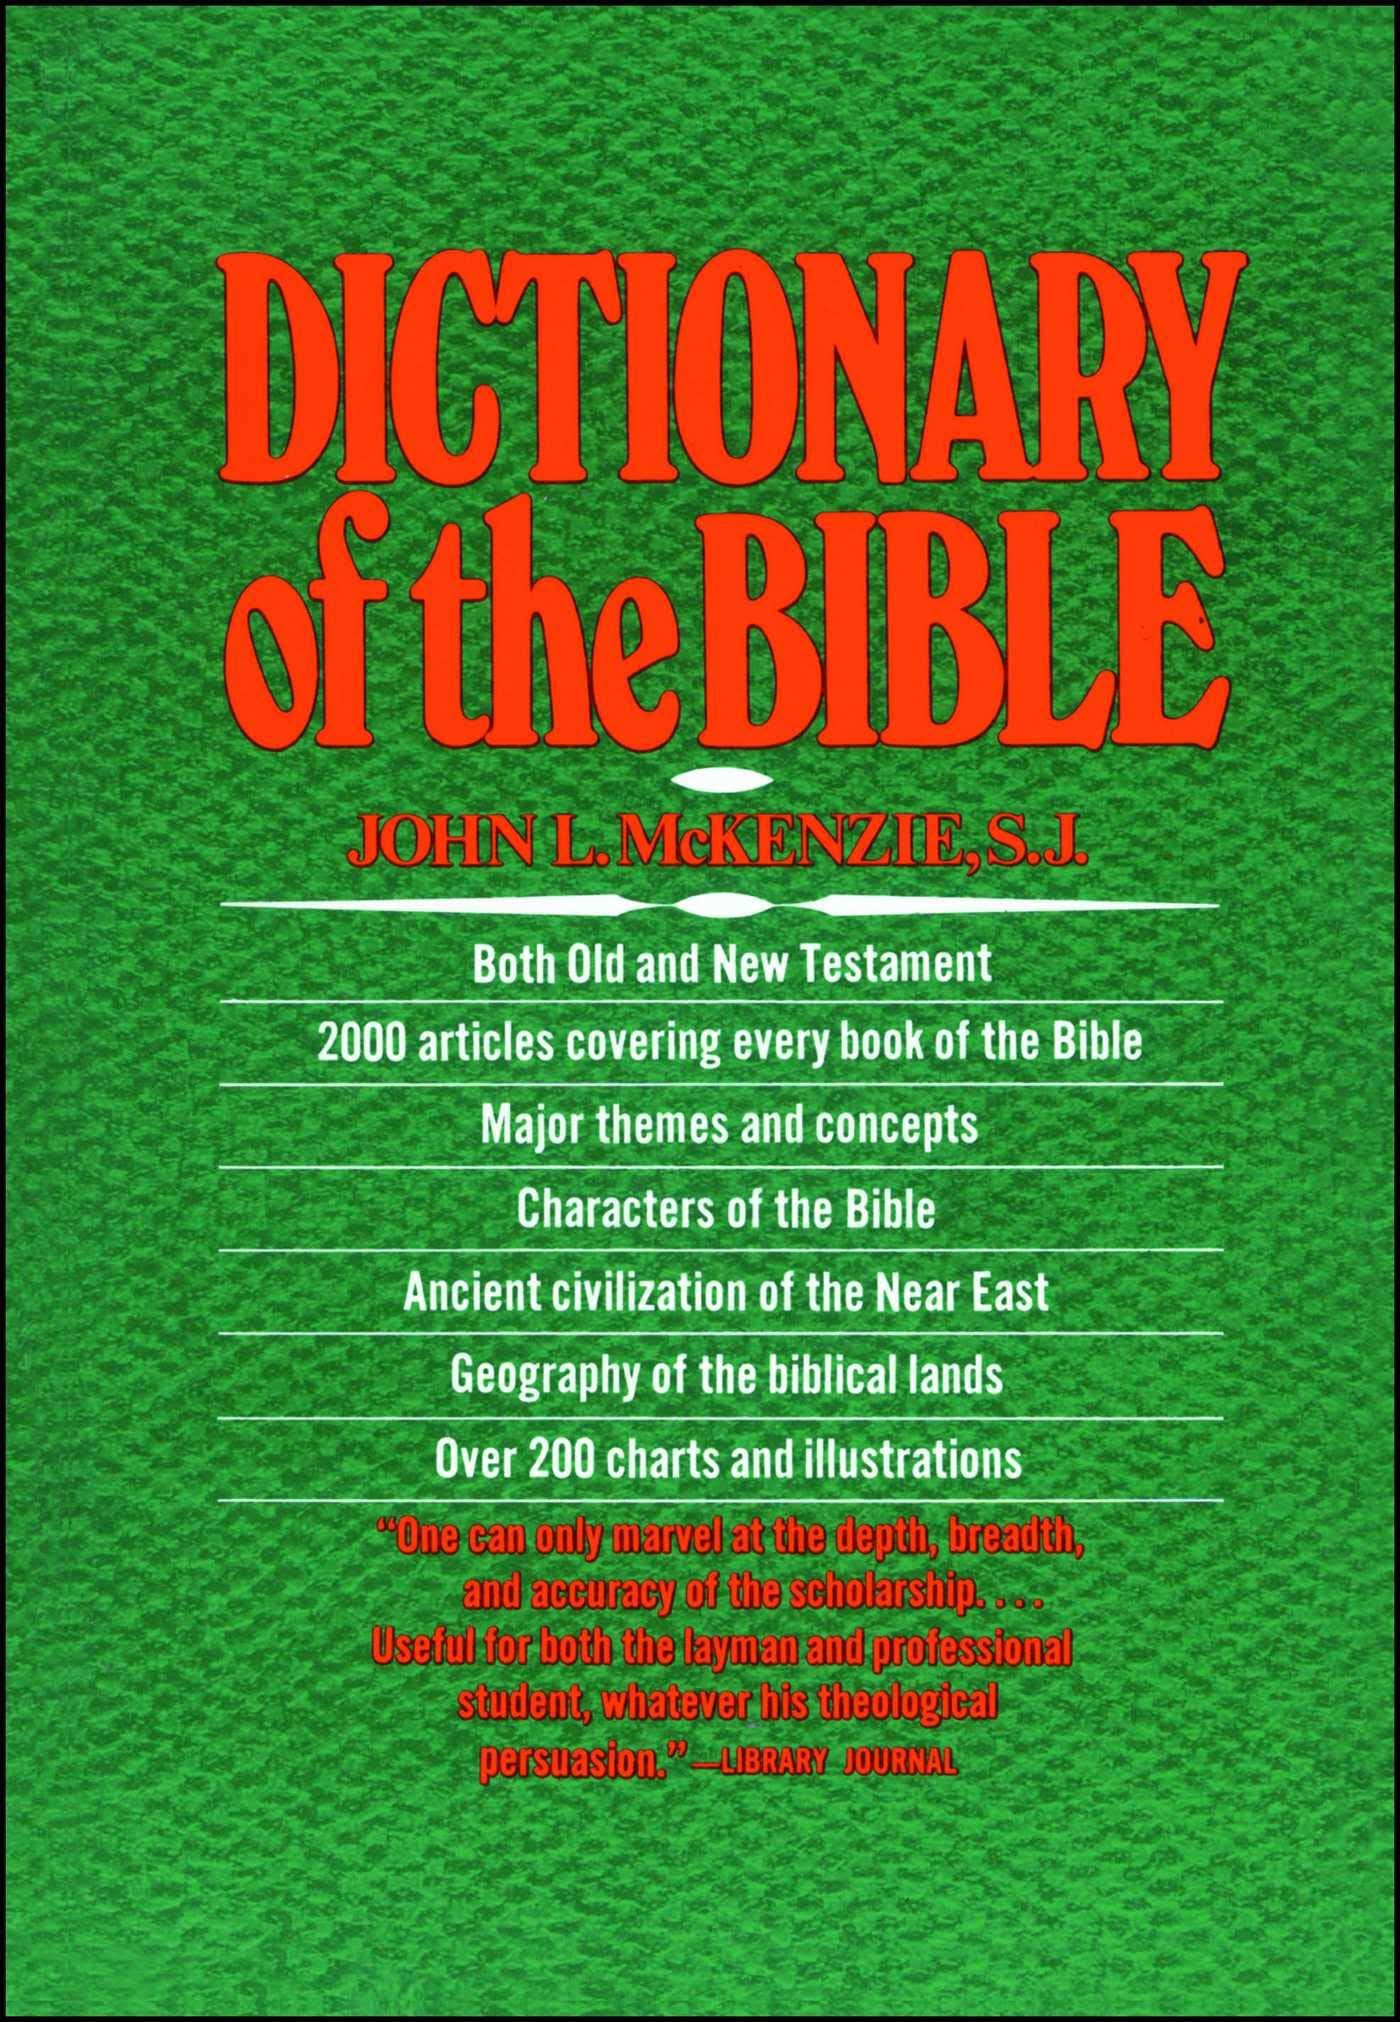 Dictionary of The Bible by McKenzie